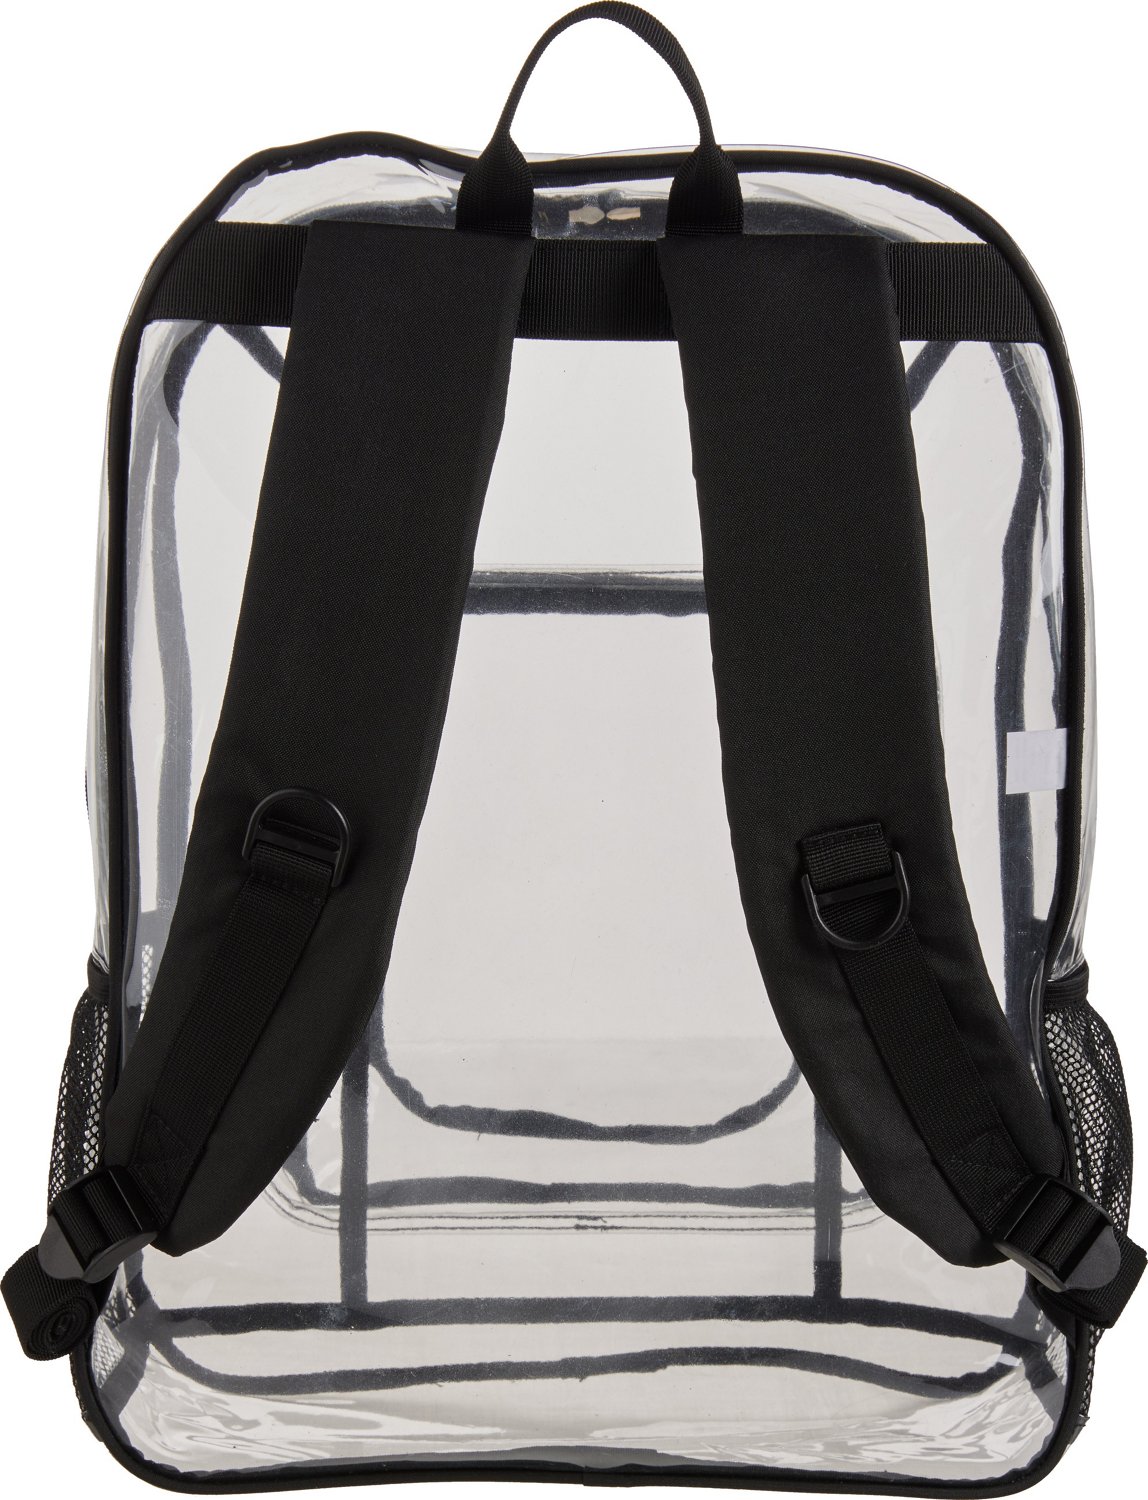 Clear Backpack Heavy Duty Transparent Backpack Ocean